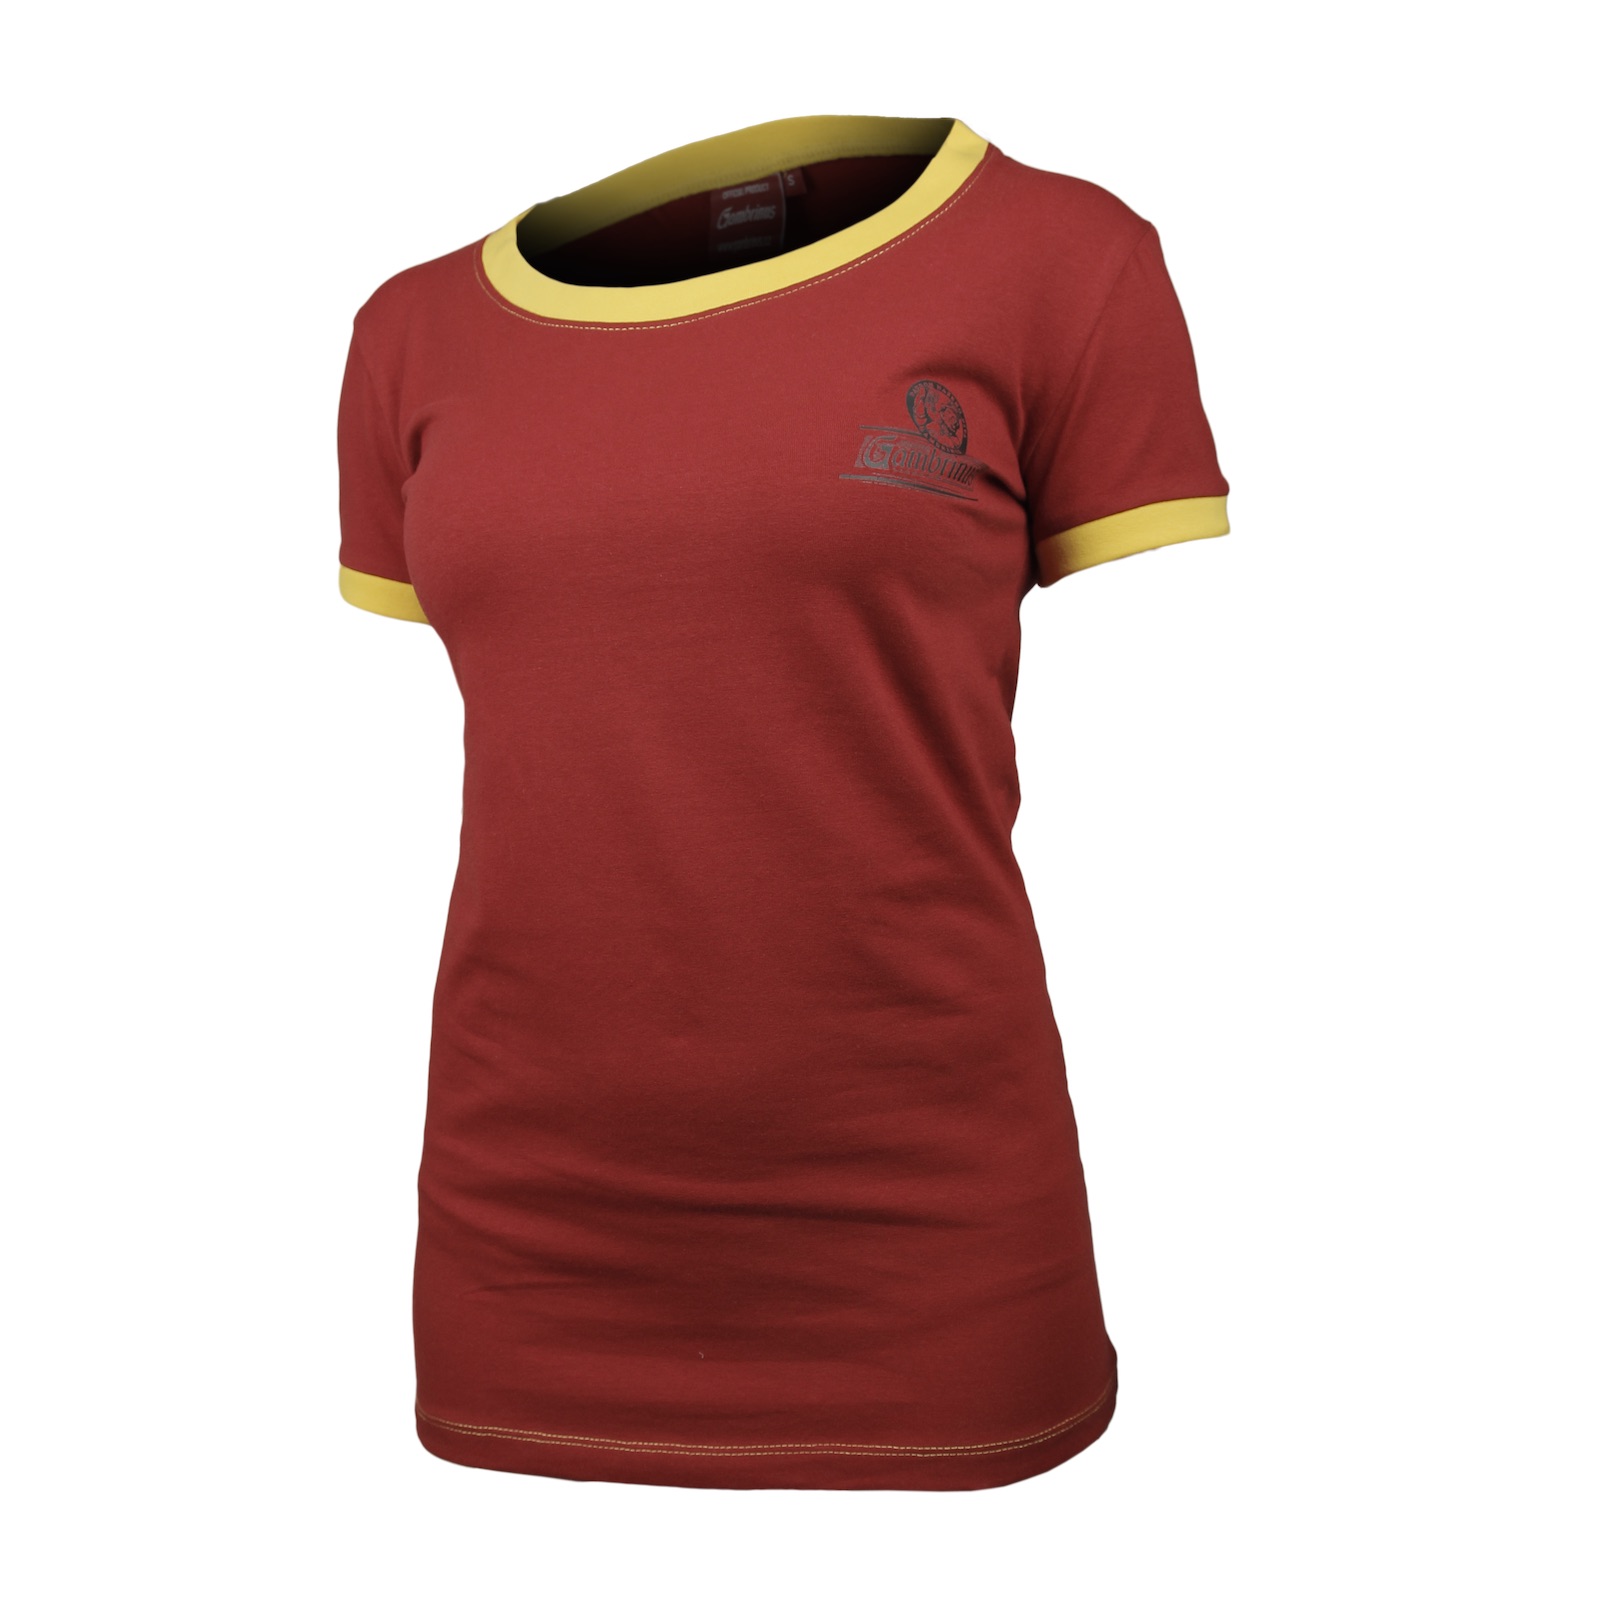 Gambrinus T-shirt ladies red with embroidery